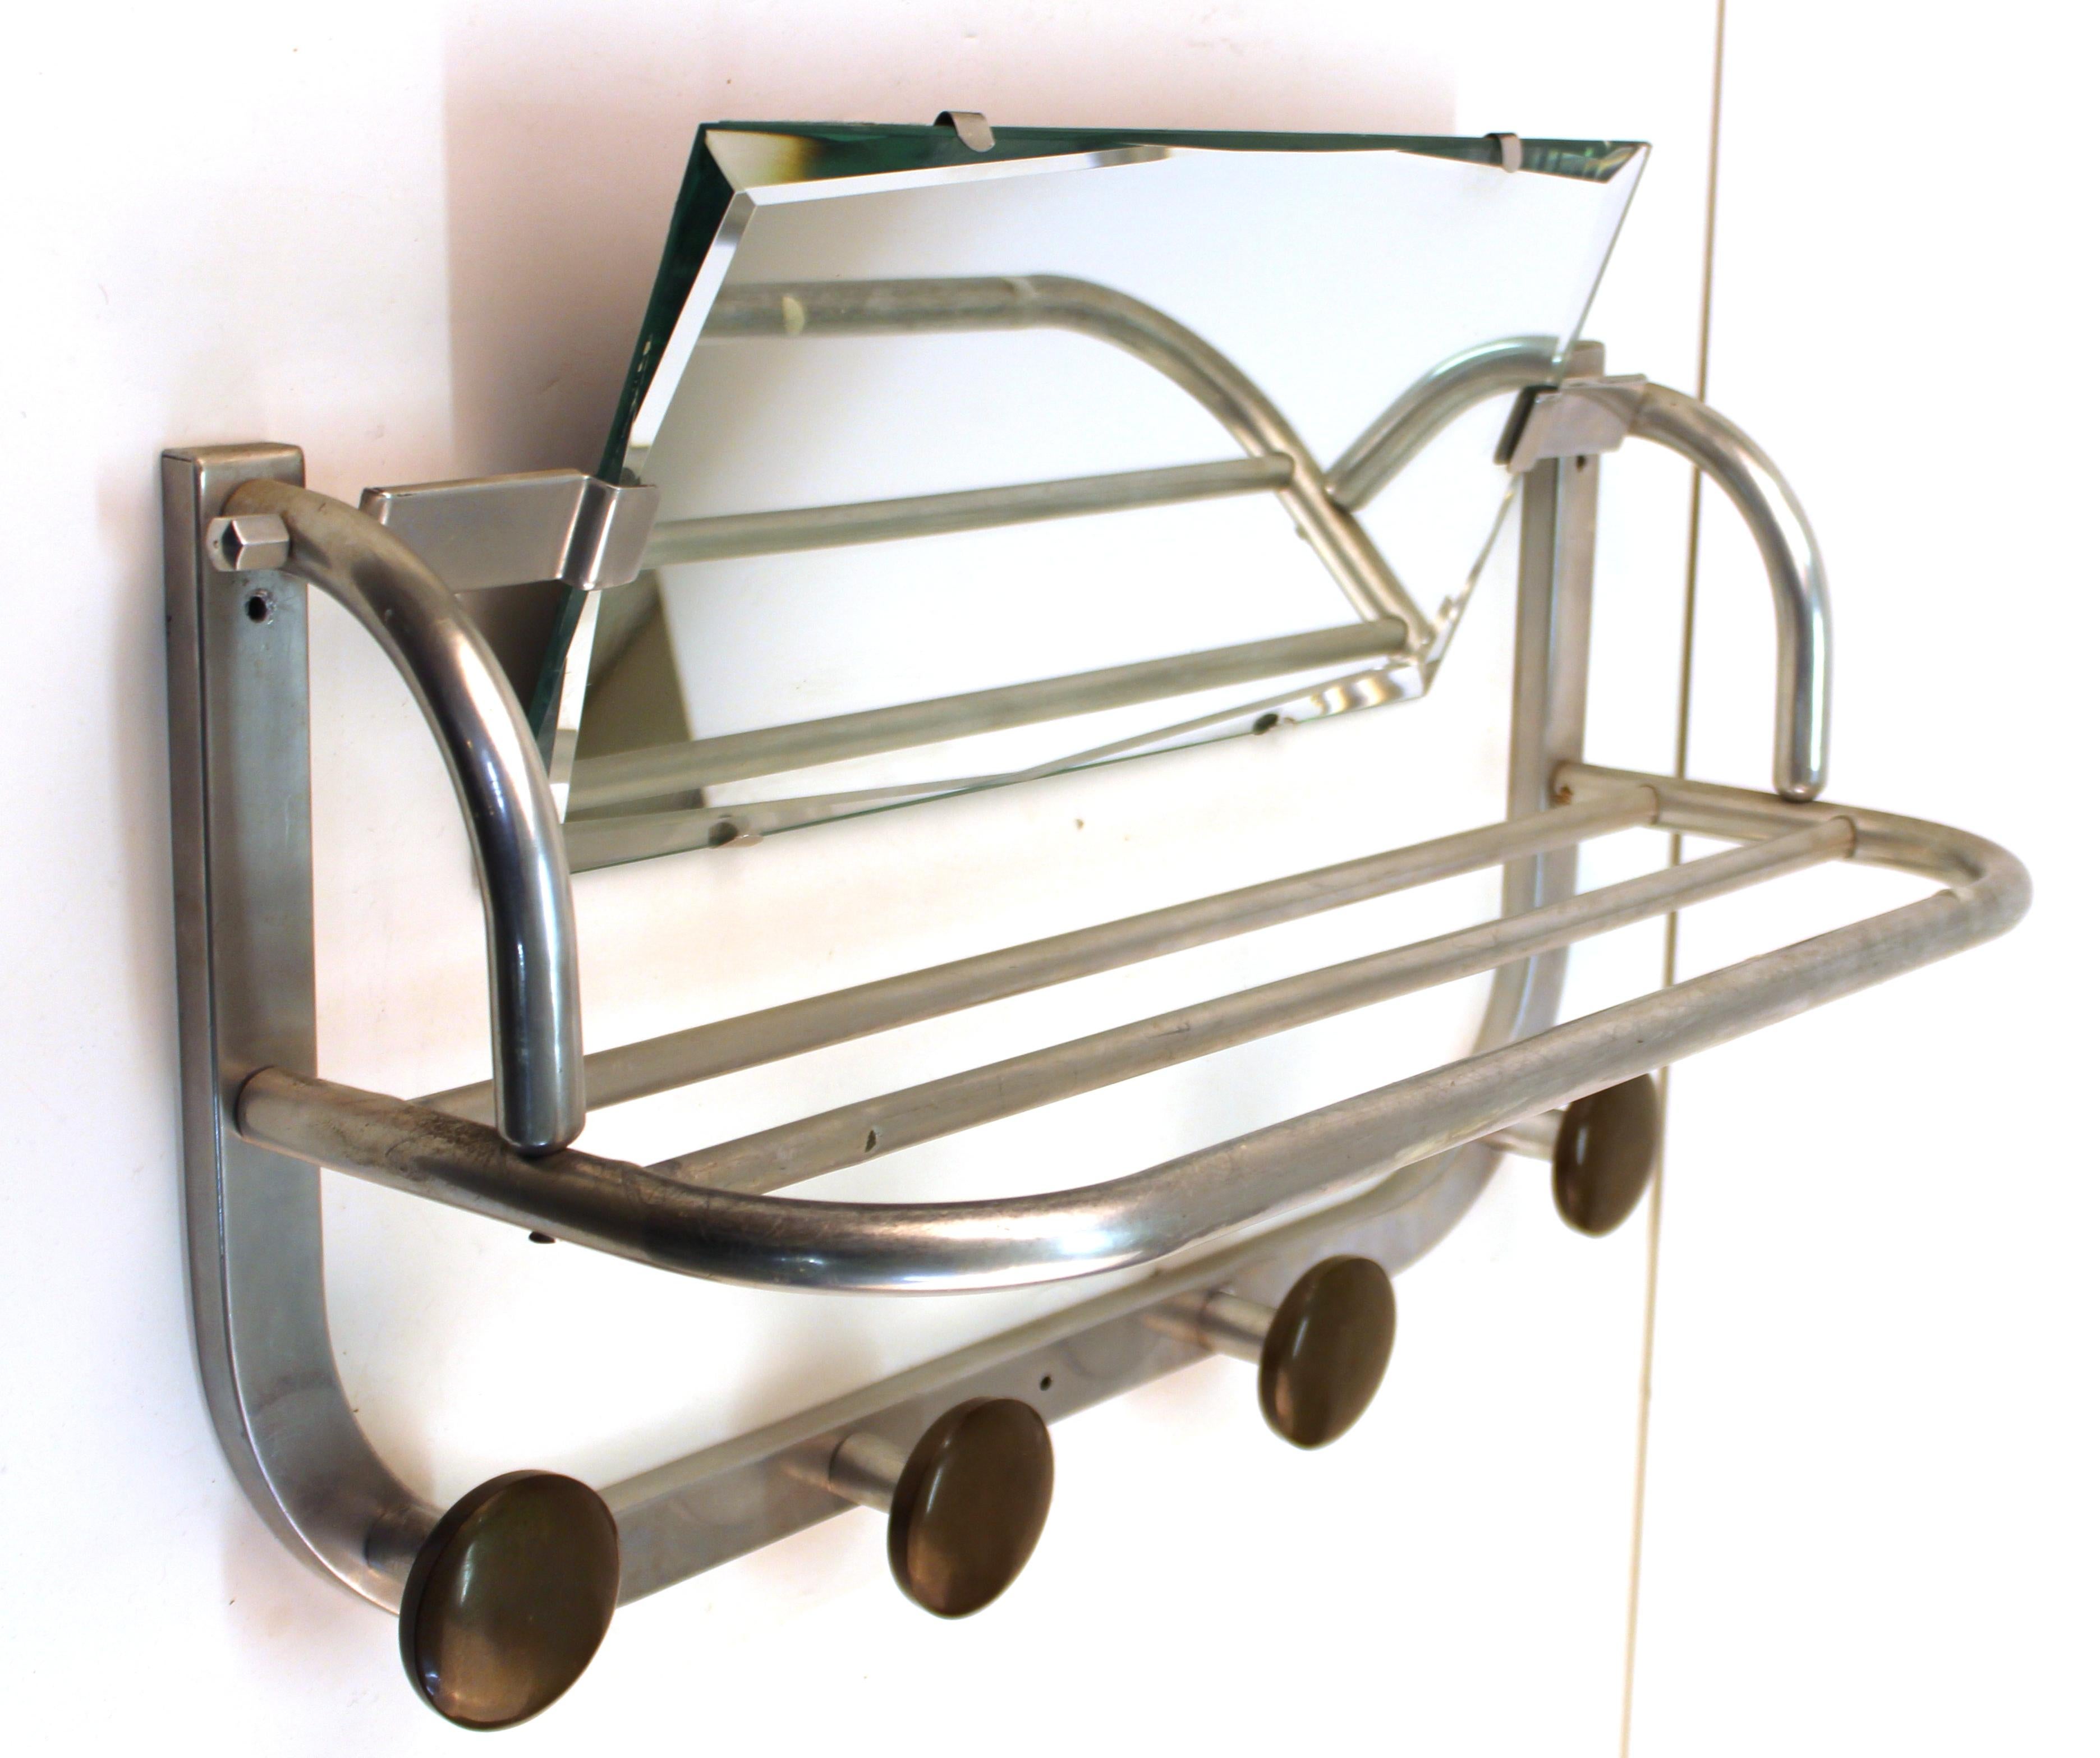 Art Deco coat and hat wall rack in aluminium, with a mirror. The piece has hooks for four coats and ample parking space for hats and gloves on the upper shelf. In great vintage condition with some age-appropriate wear.